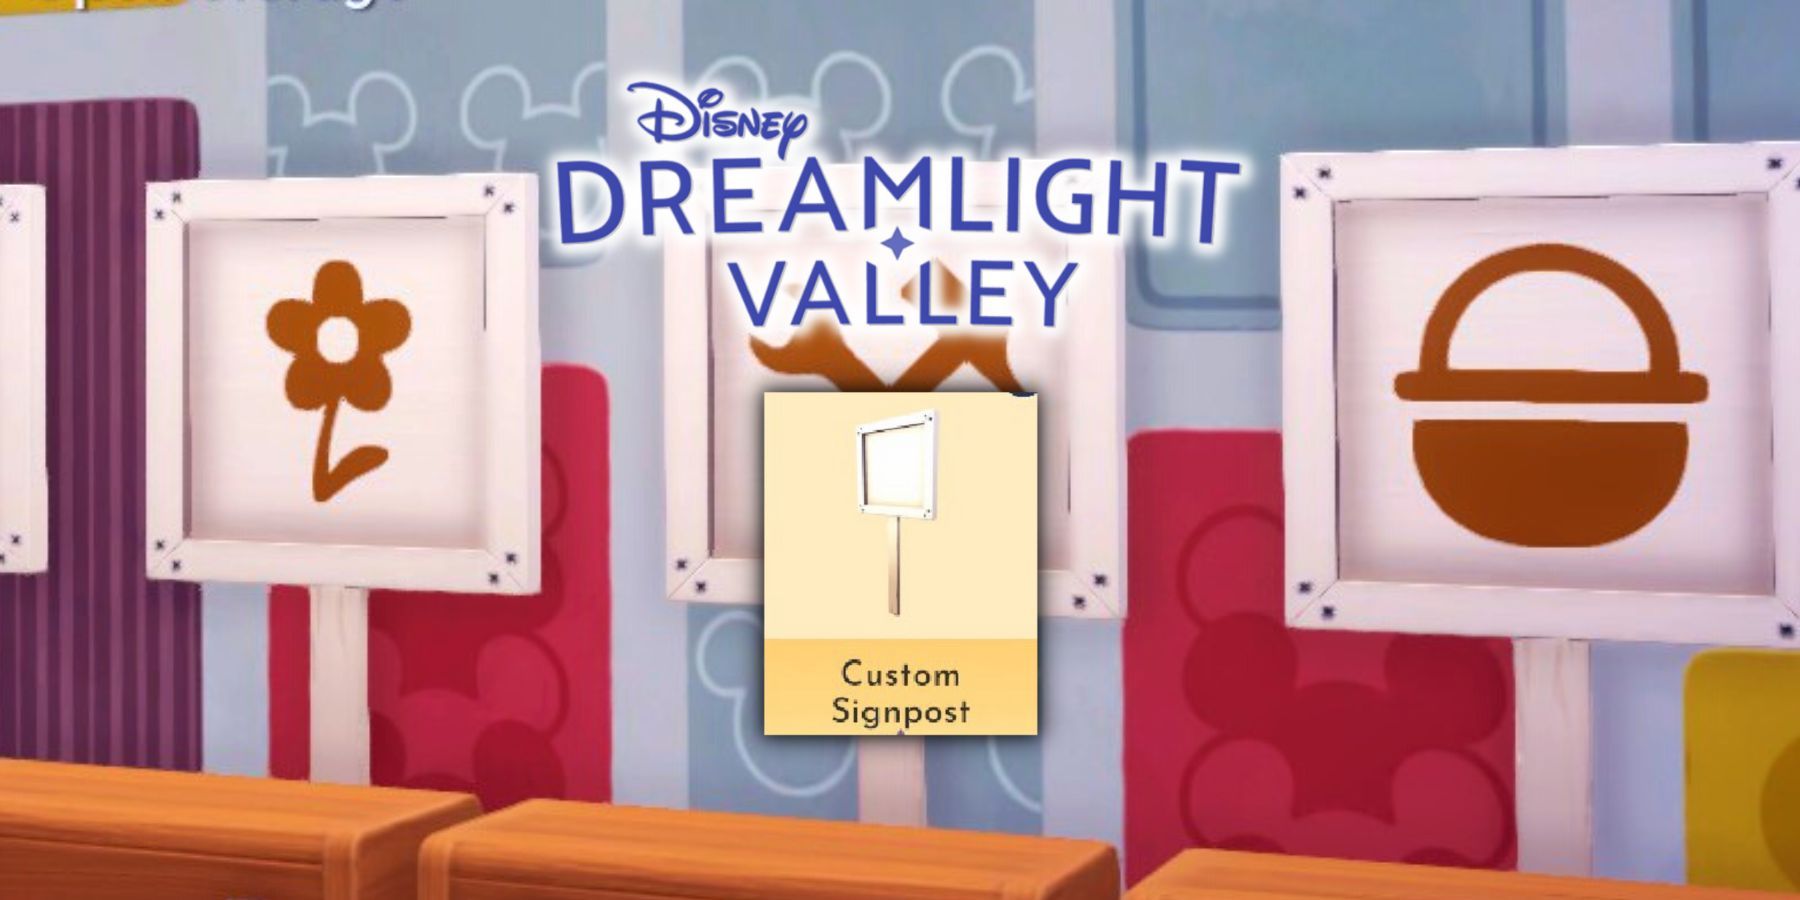 Disney Dreamlight Valley: How to Customize Signposts